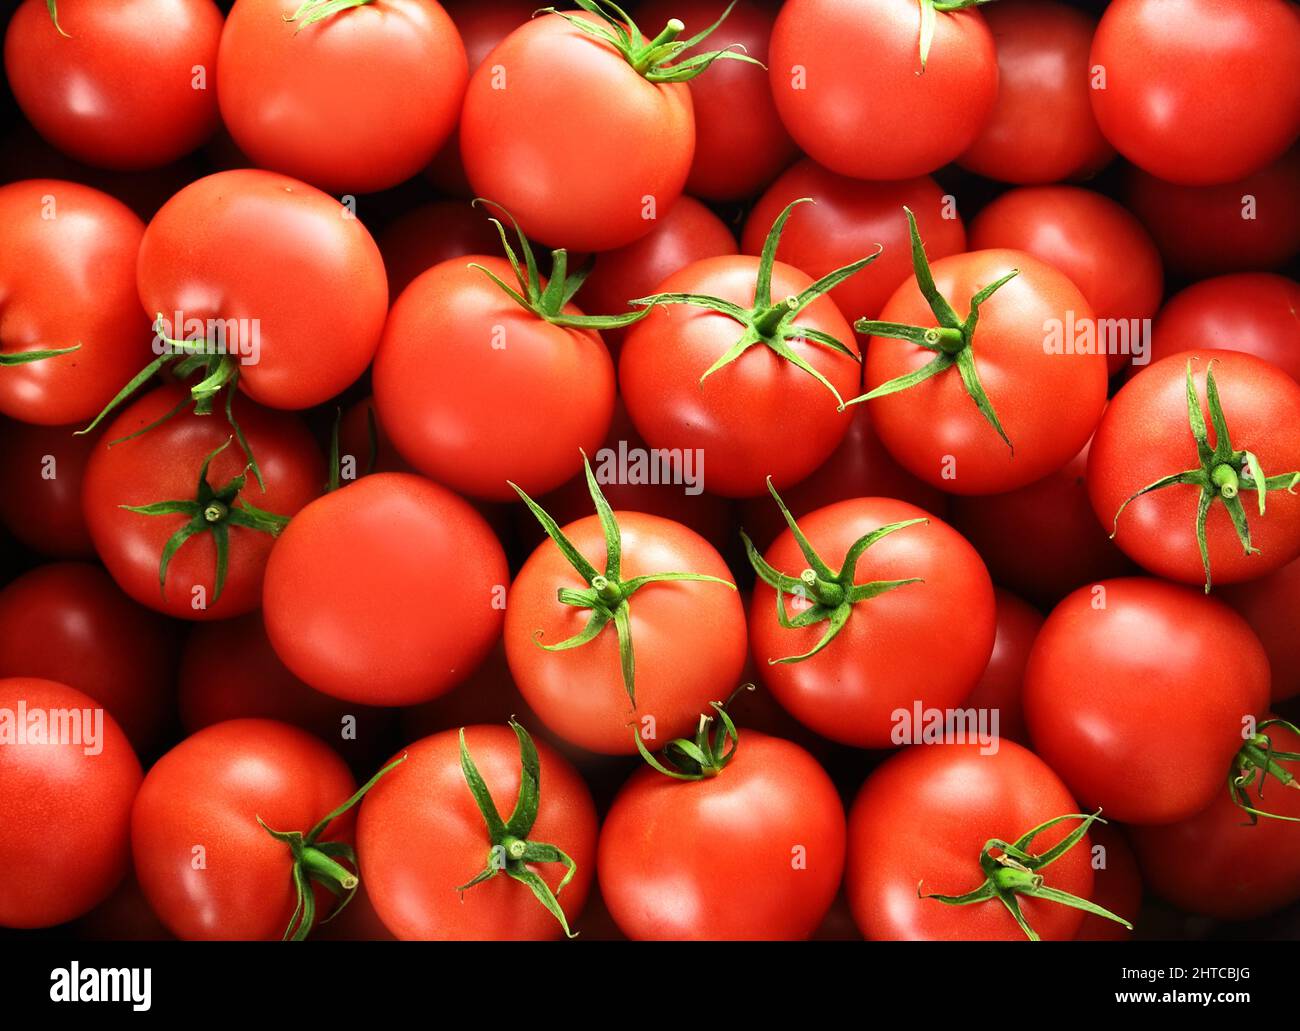 background with juicy and red tomatoes Stock Photo